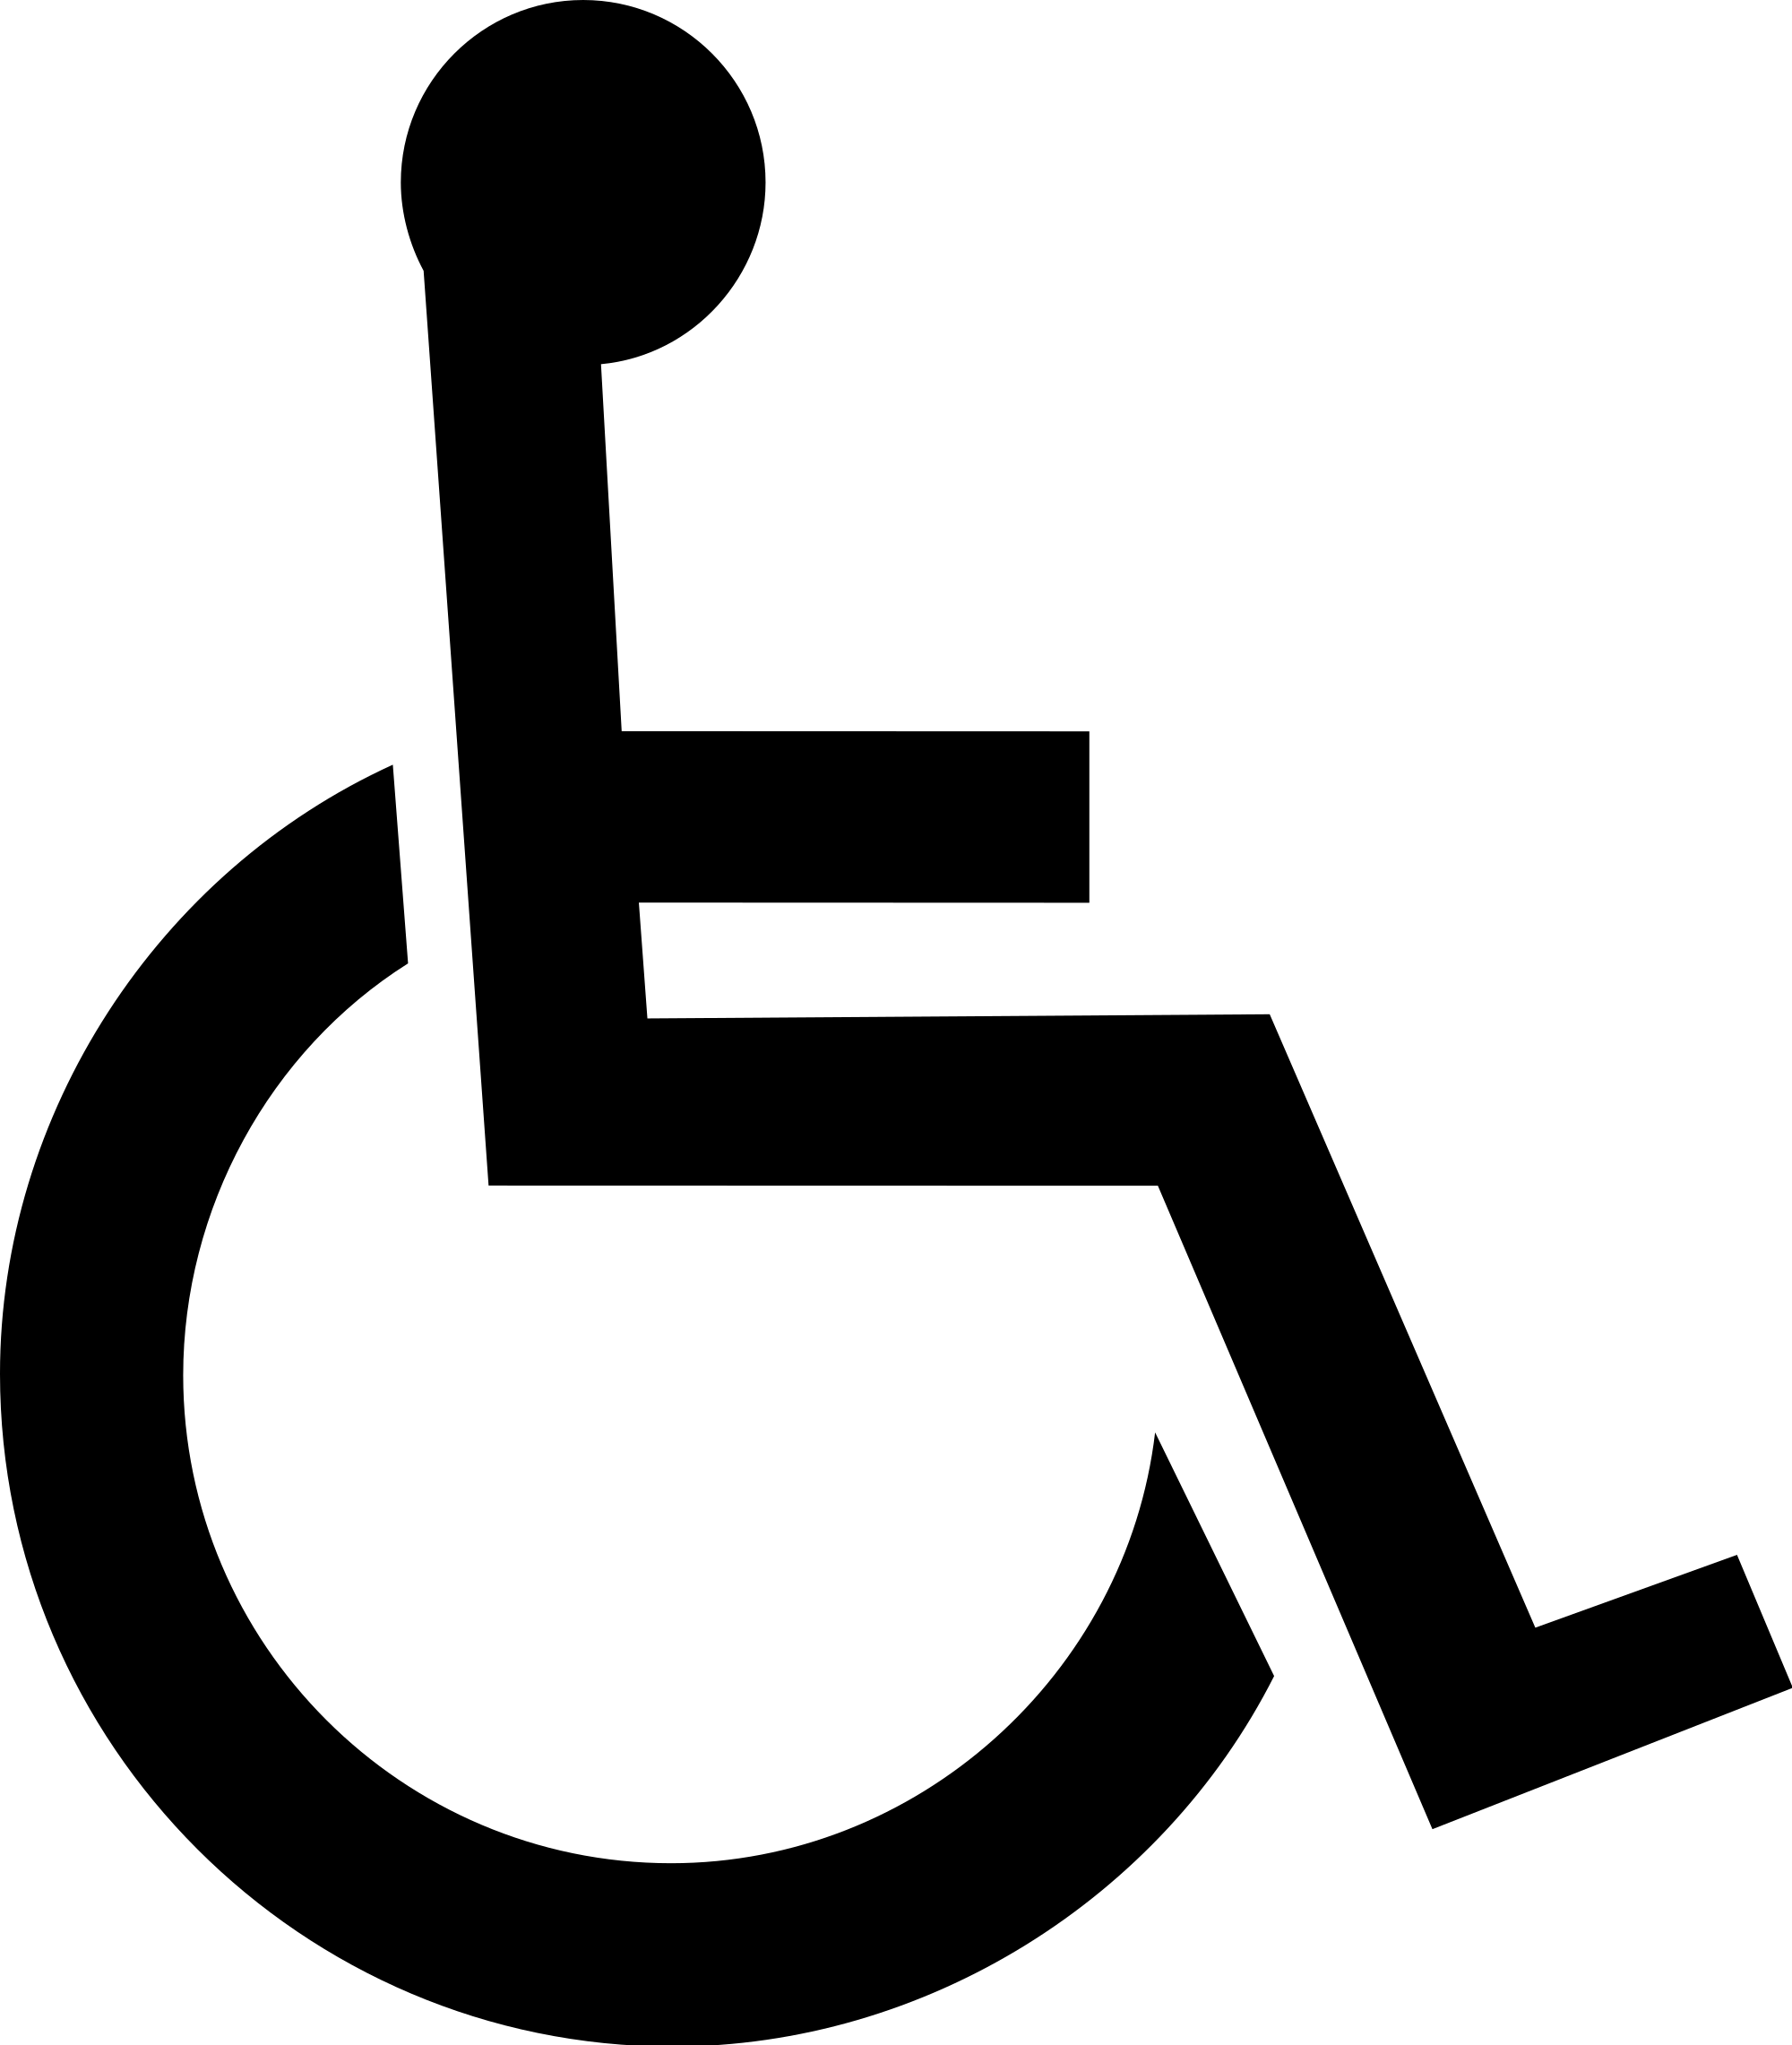 Handicap-Accessible Logo - File:Wheelchair symbol.svg - Wikimedia Commons